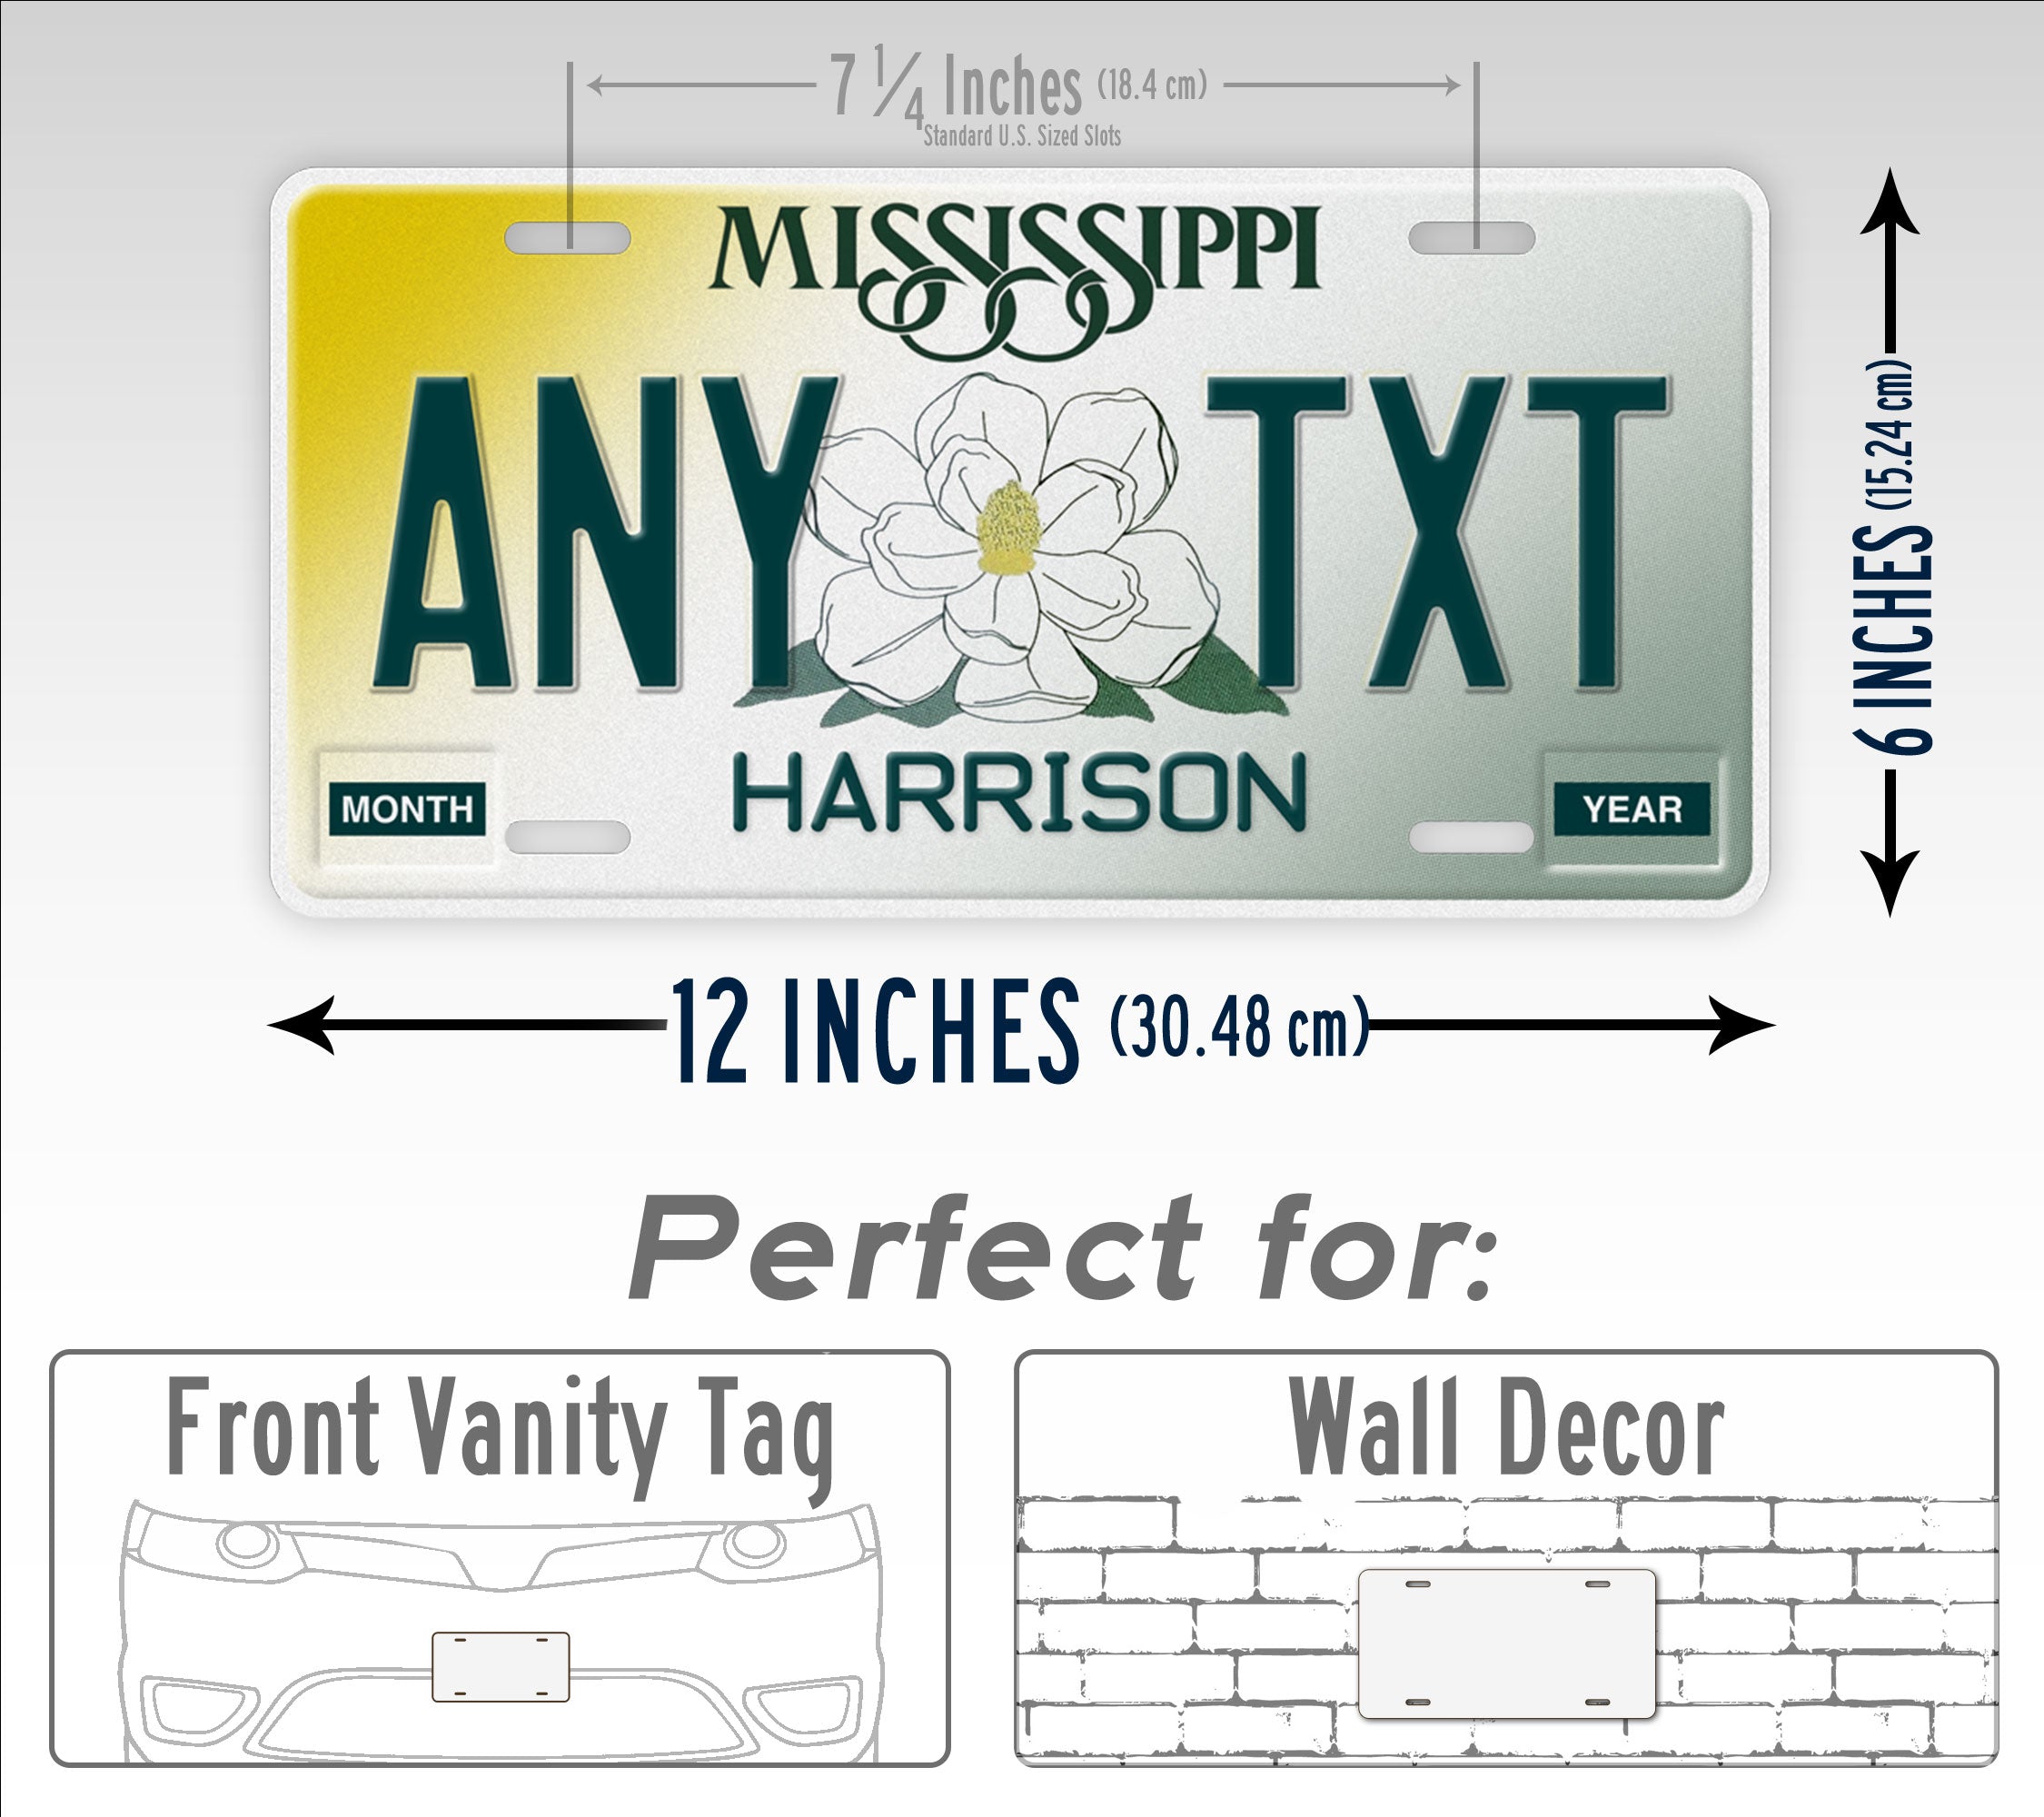 Personalized 1997-2002 Mississippi State Custom License Plate